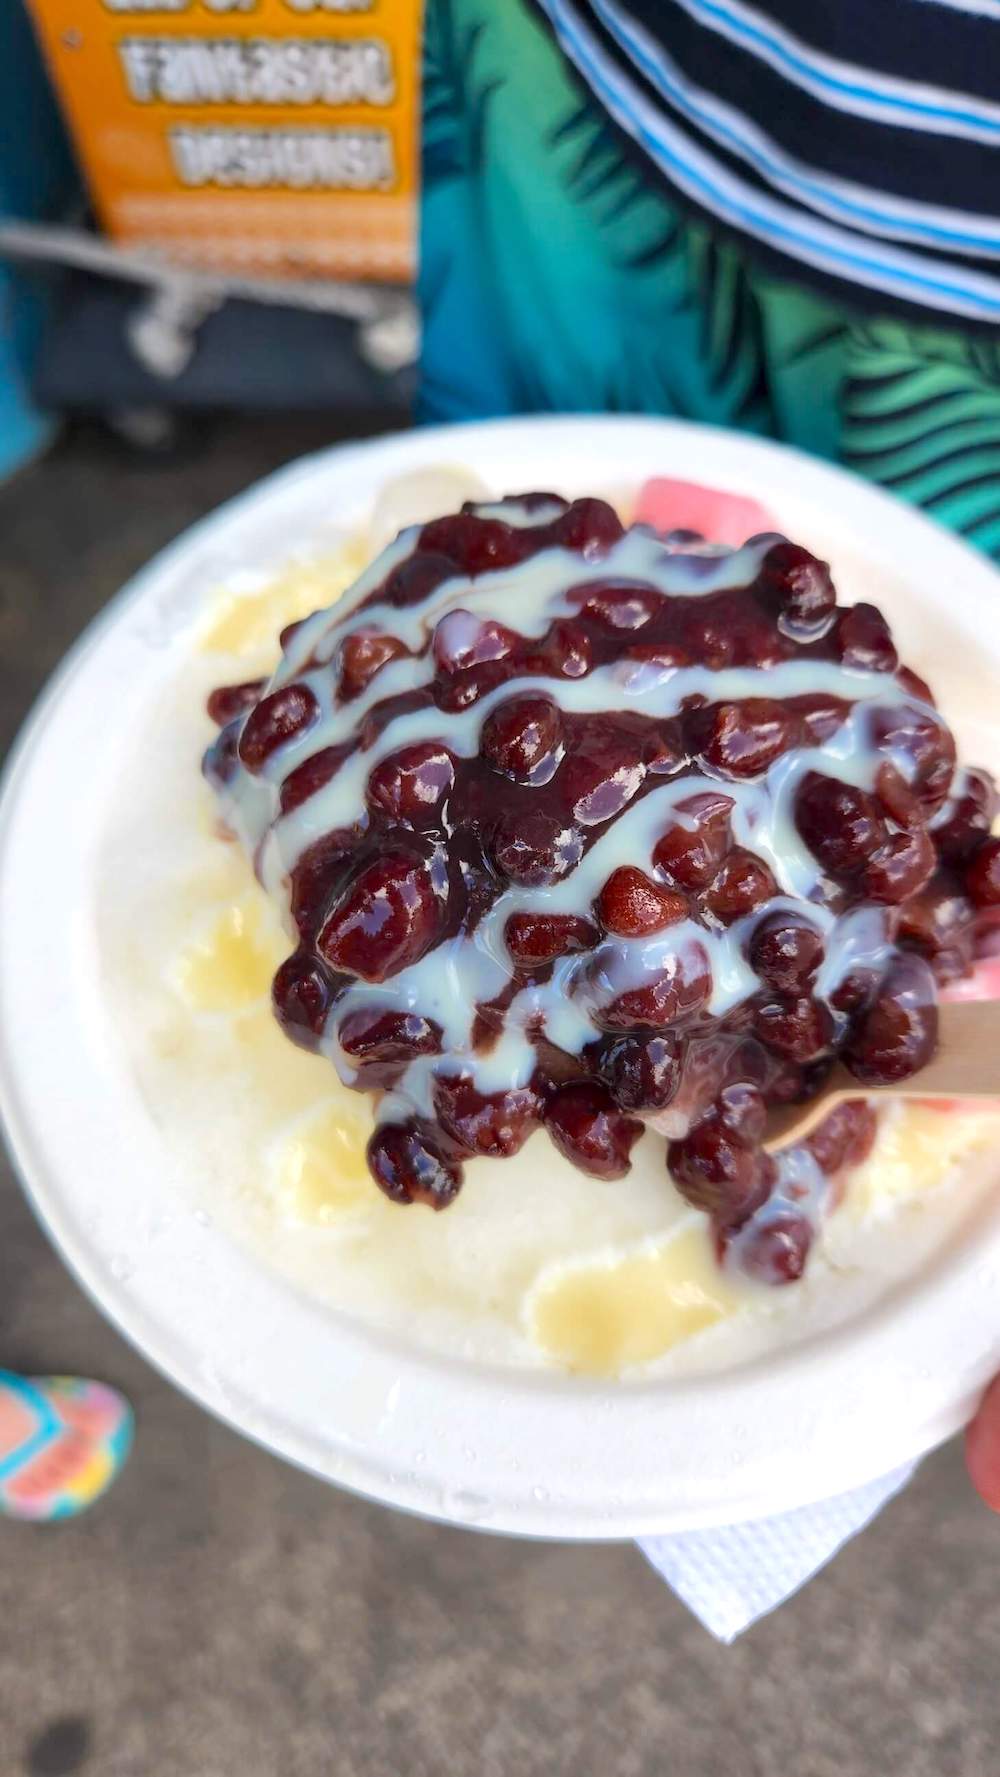 Image of an Azuki Bowl from Waiola Shave Ice on Oahu